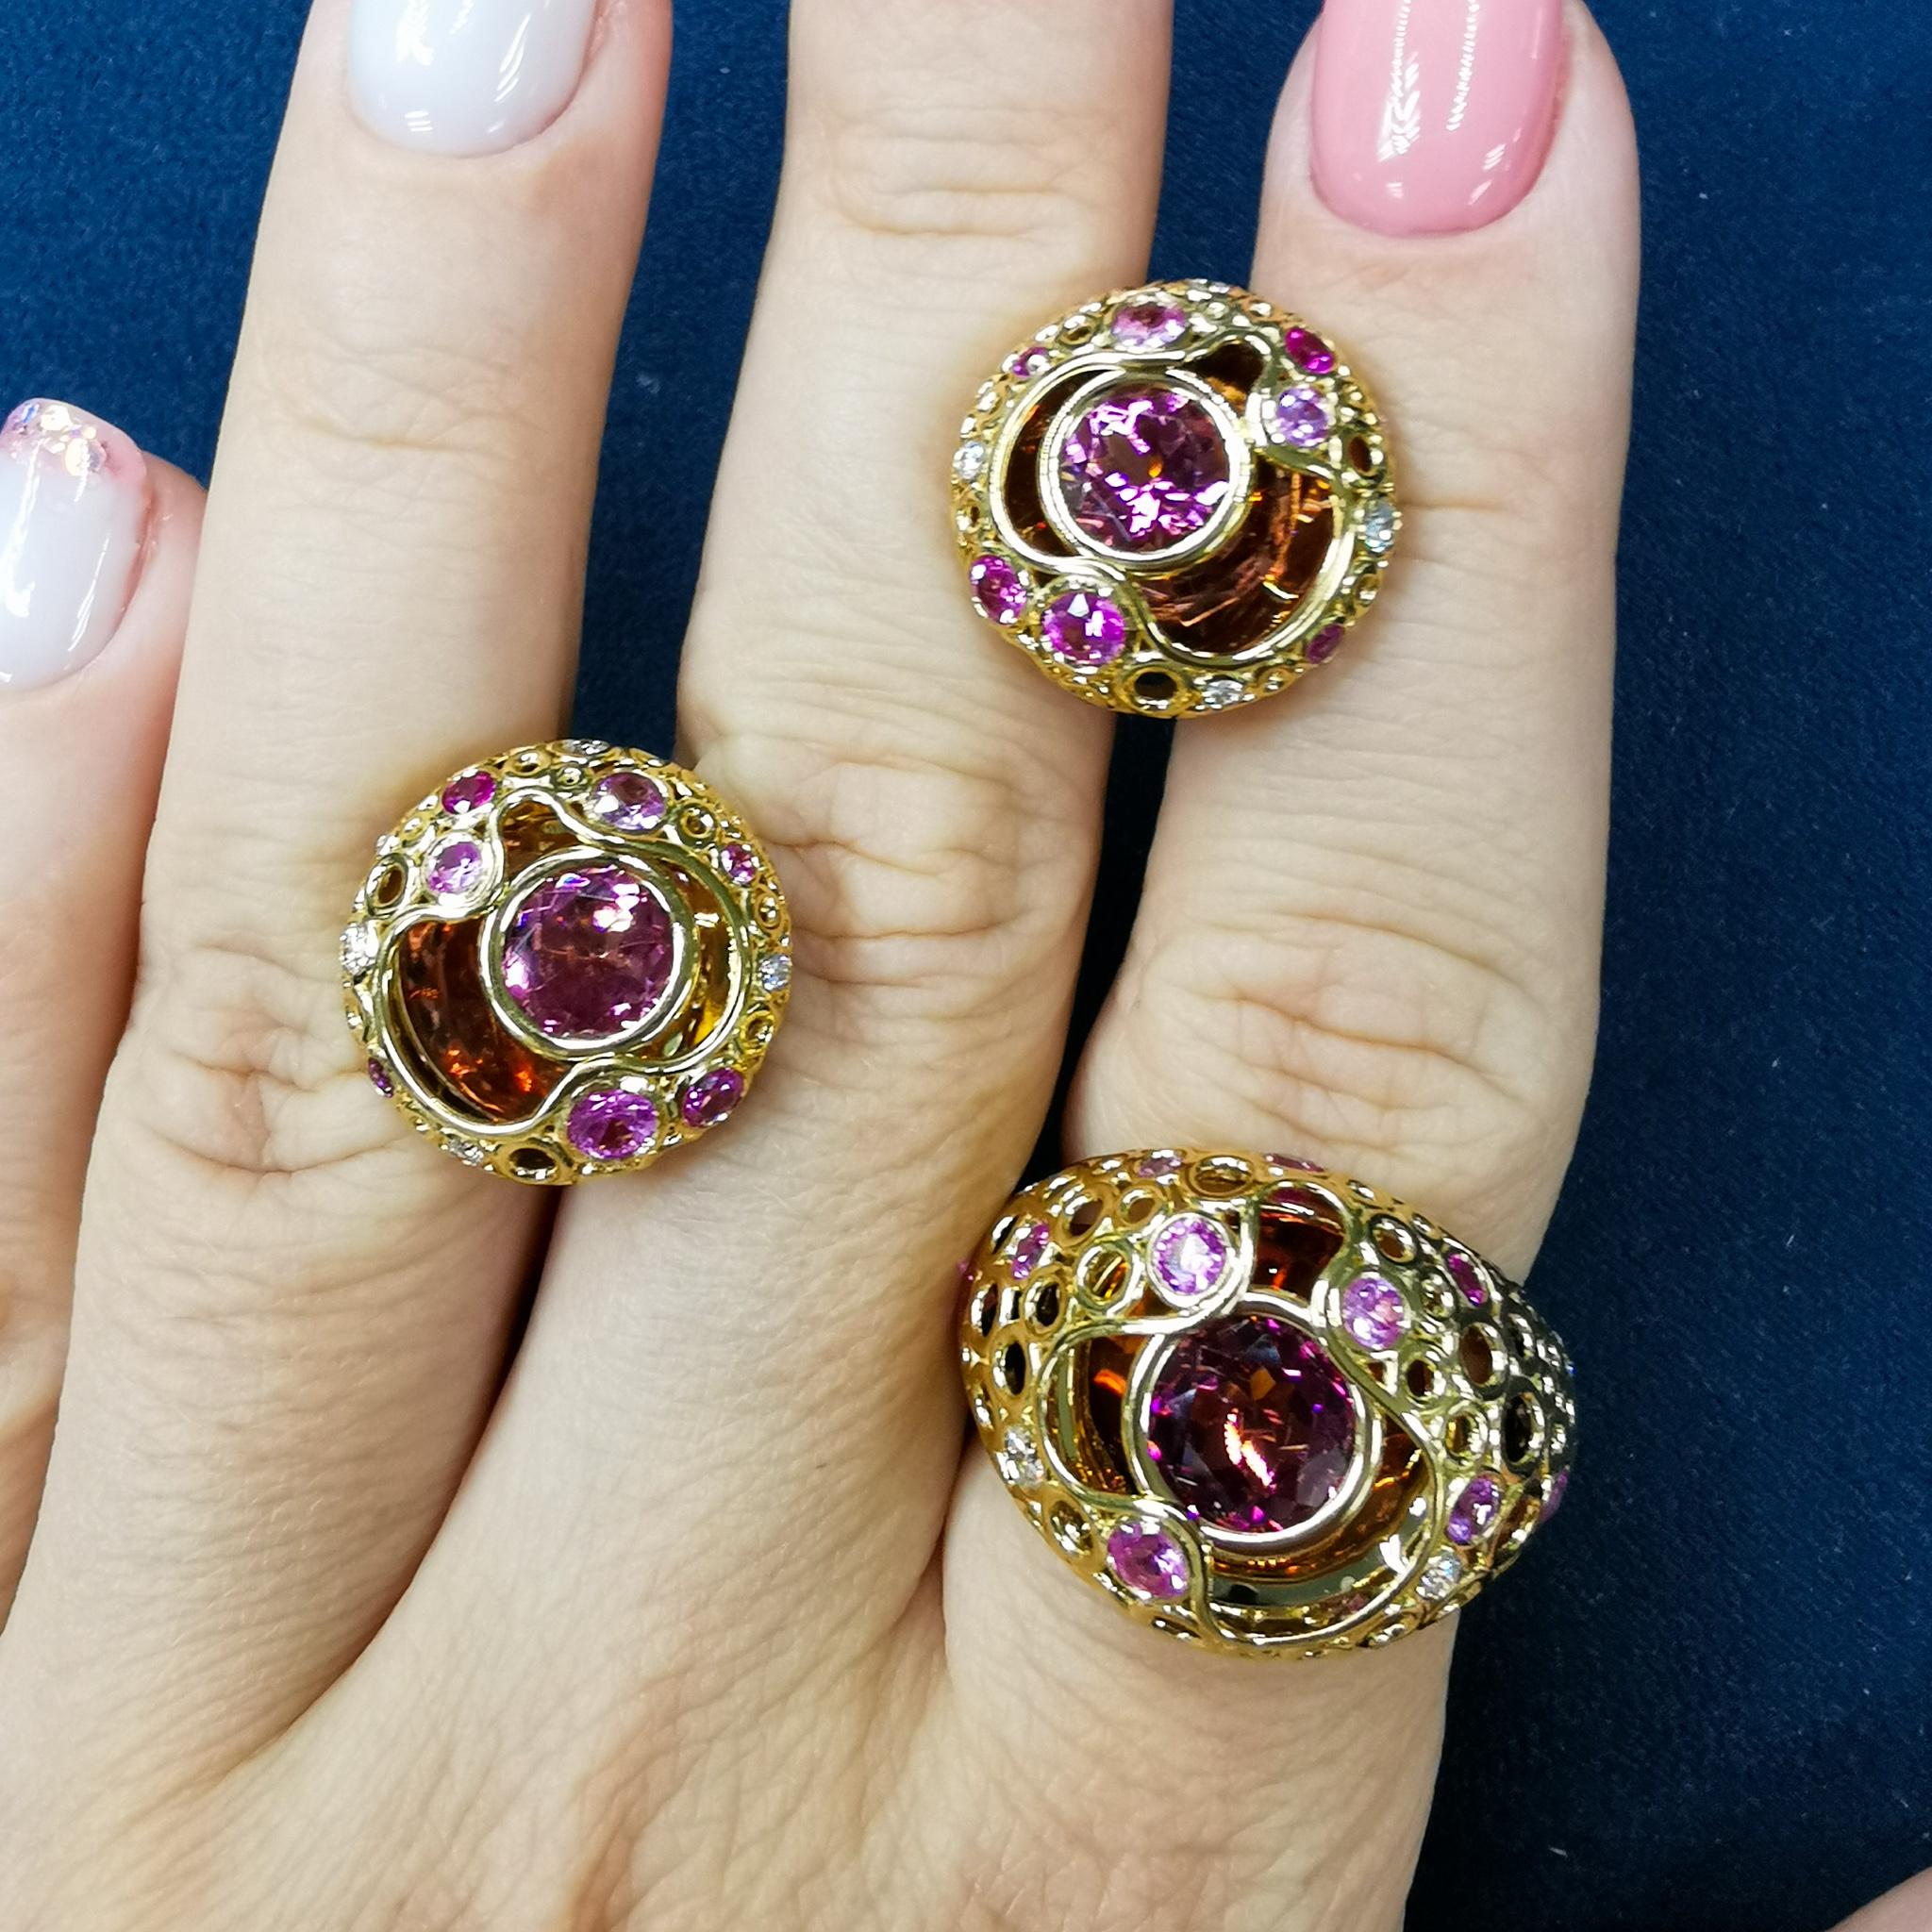 Pink Tourmaline Pink Sapphires Diamonds 18 Karat Yellow Gold Bubble Suite
Incredibly light and airy Suite from our Bubbles Collection. White 18 Karat Gold is made in the form of variety of small bubbles, some of which have Pink Sapphires and